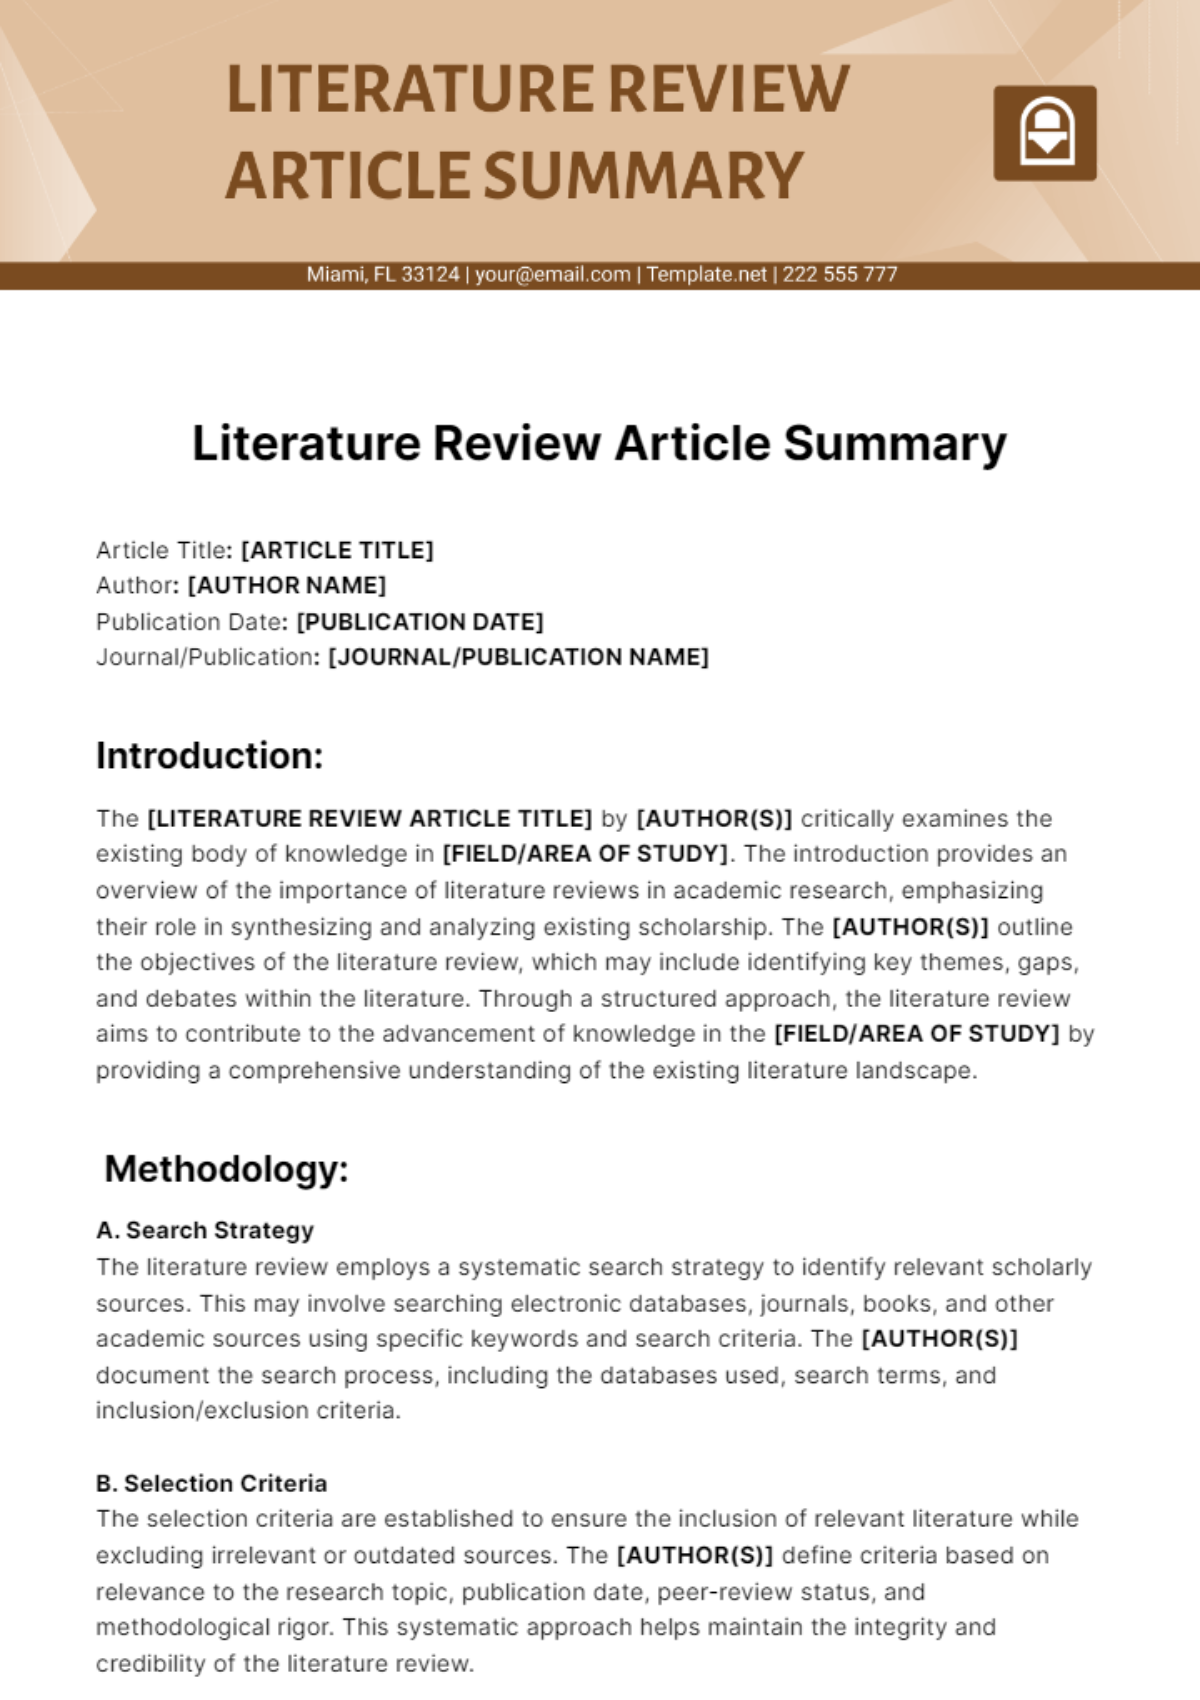 Literature Review Article Summary